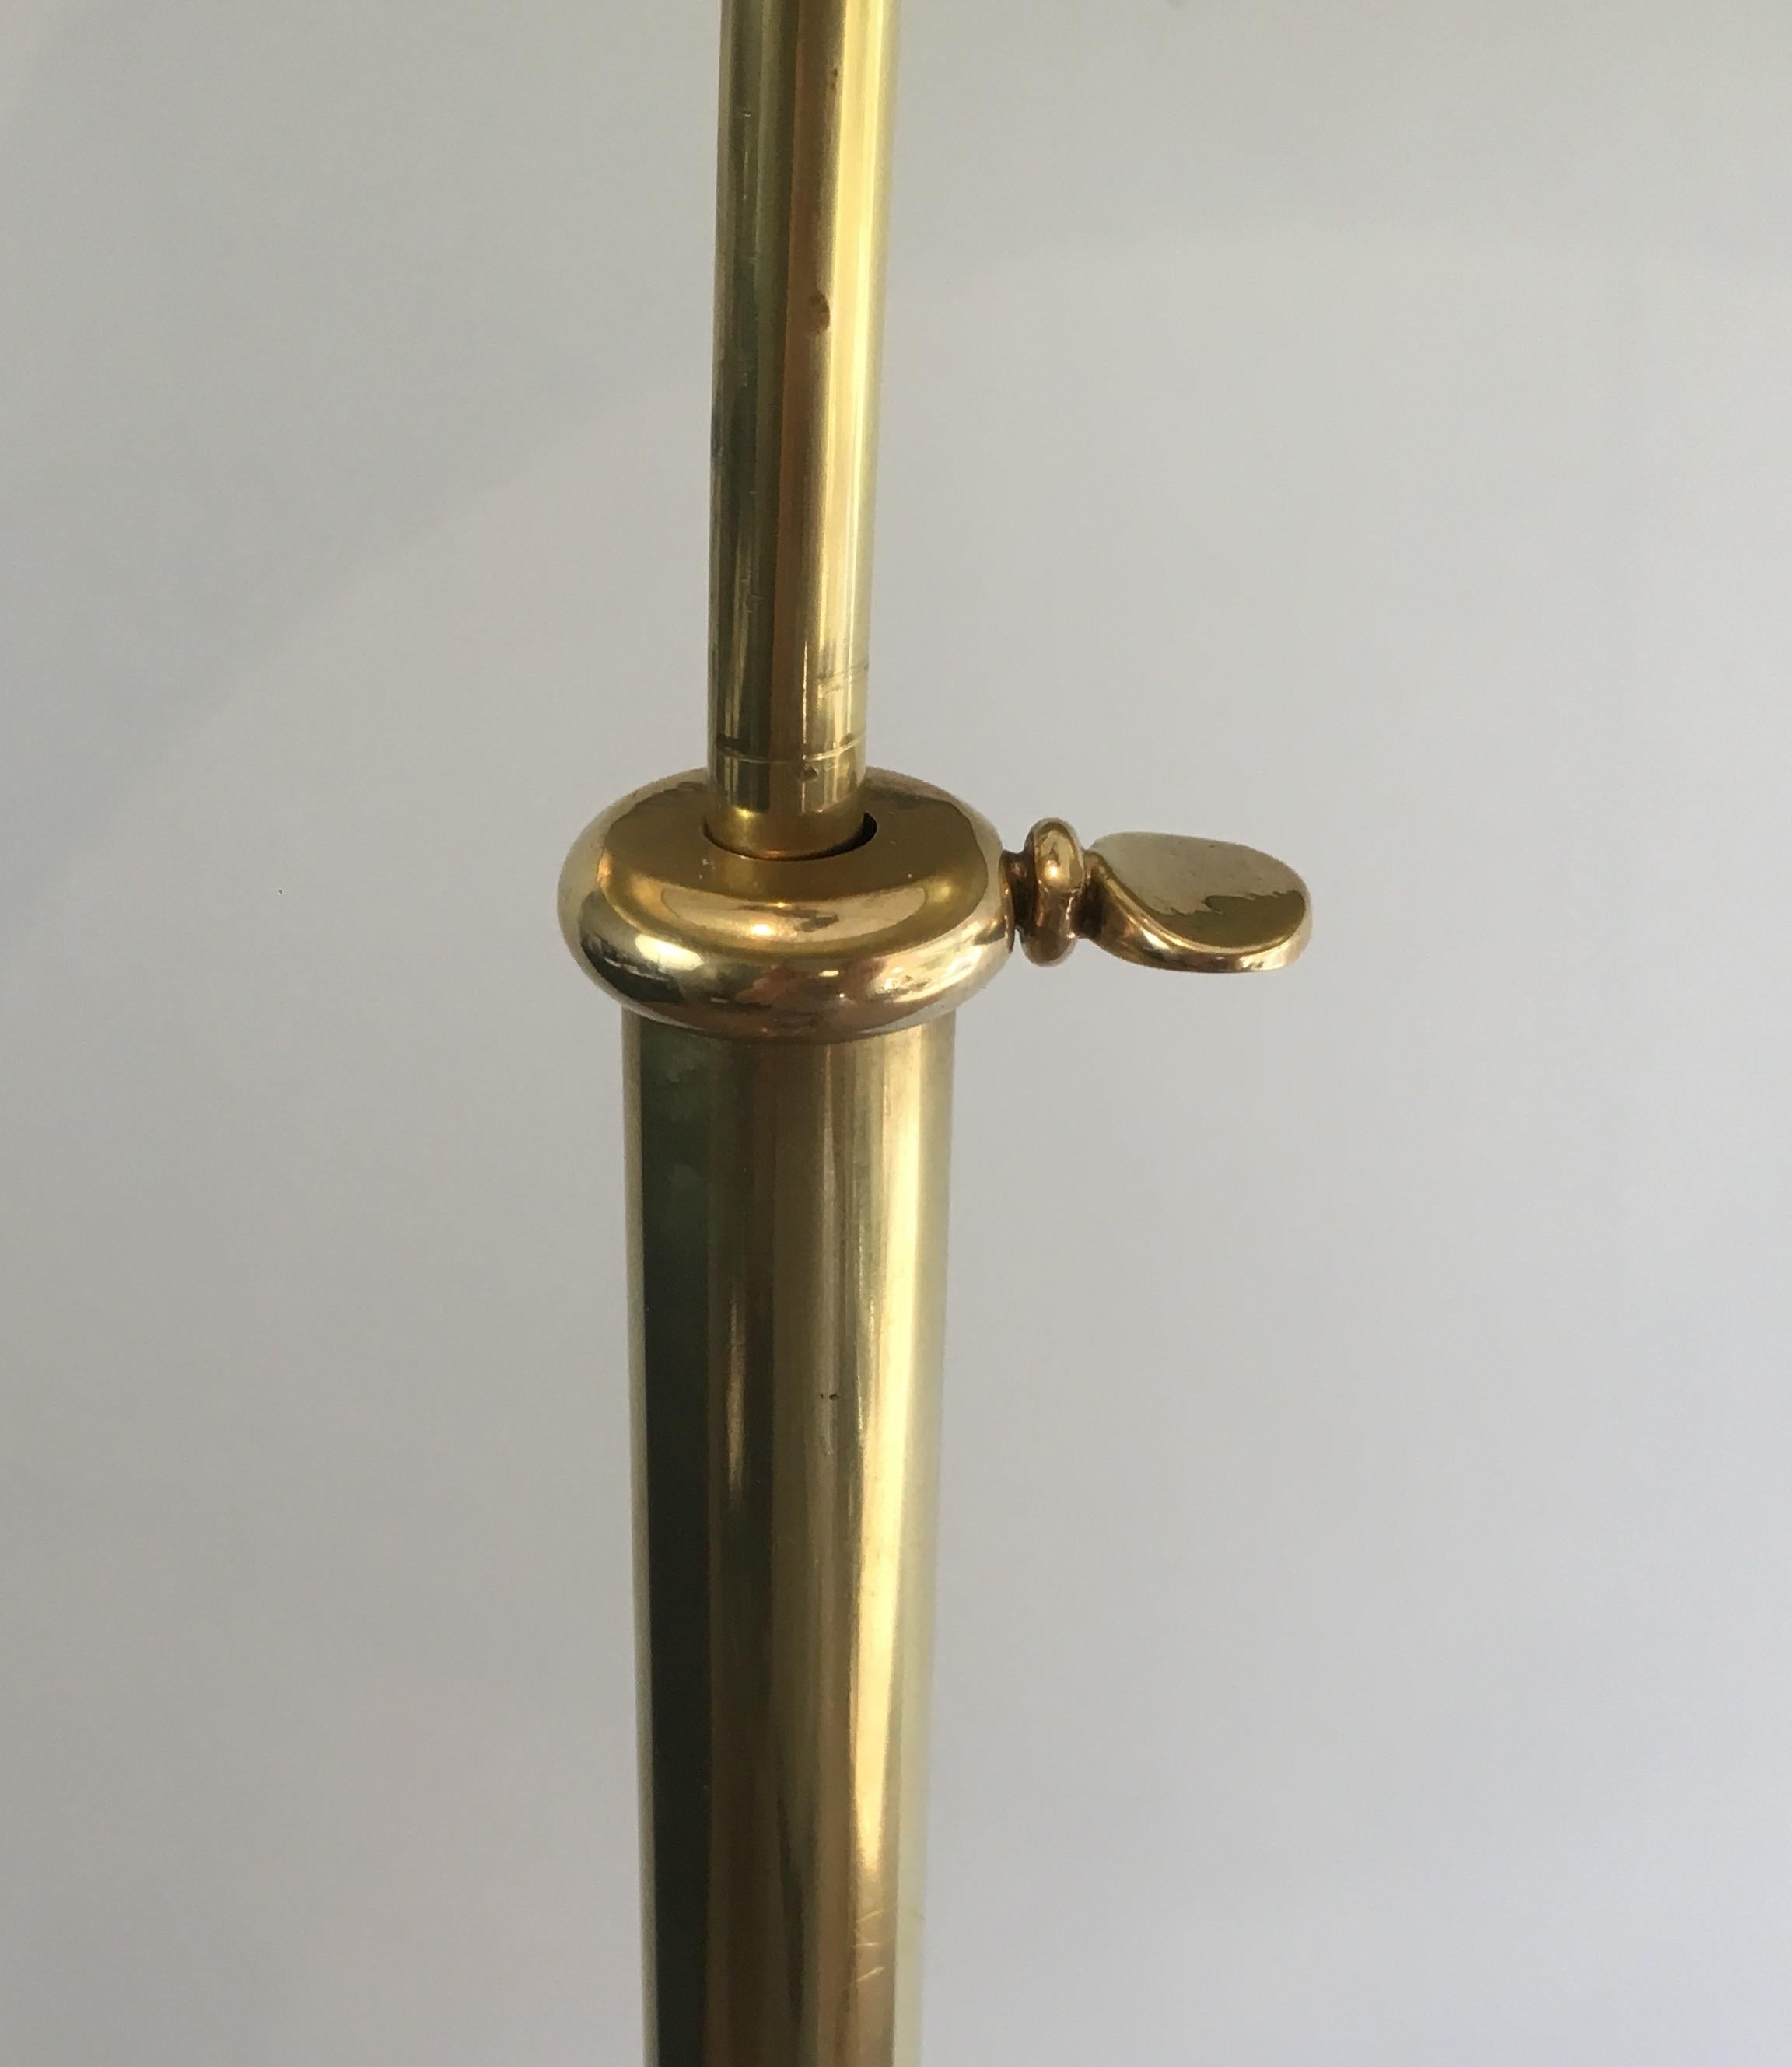 French Attr. to Guy Lefèvre for Jansen, Neoclassical Brass Floor Lamp with Claw Feet